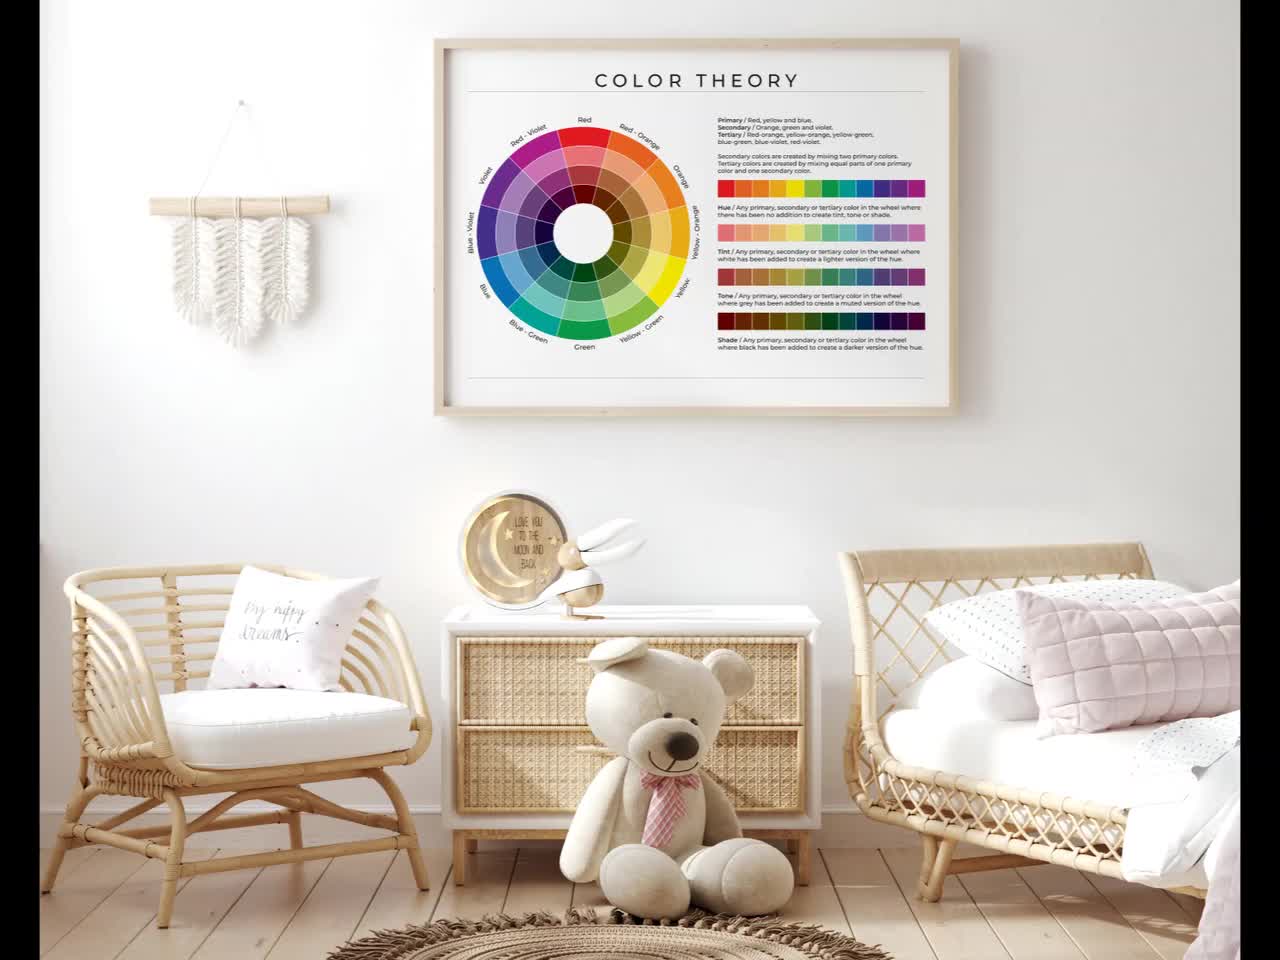 Color Wheel on Sand American English Digital Printable Educational Poster  Color Theory Wheel for Children at Home, Kindy or School 